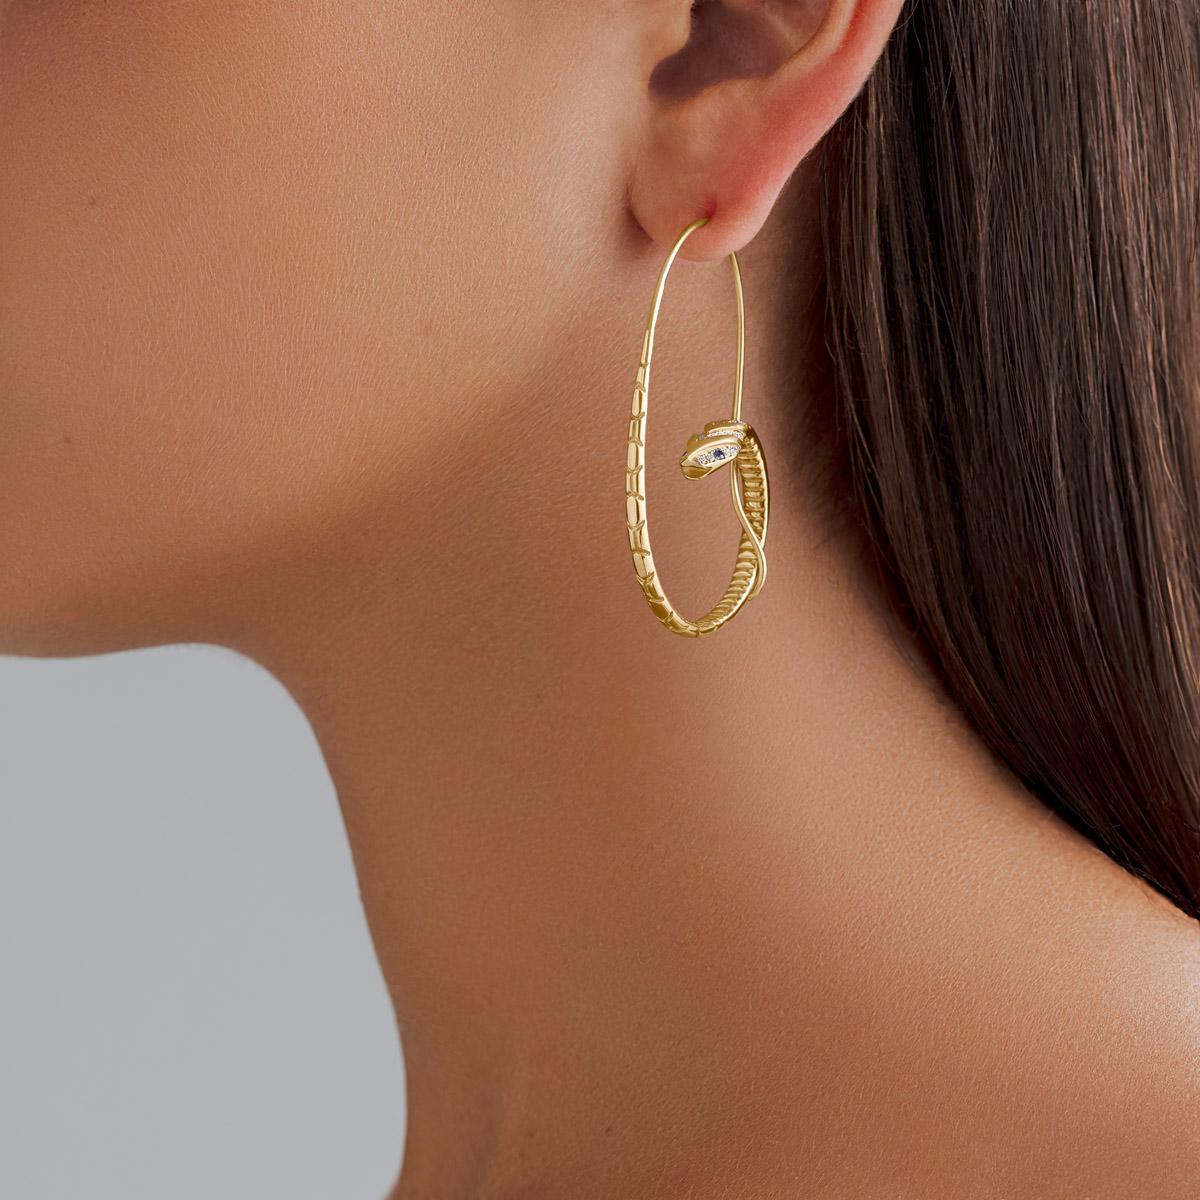 18 Karat Yellow Gold, 0.10 carat Sapphire and 0.34 carat Diamond Snake Hoop Earrings.

Symbolic of eternal love, these Snake Hoop Earrings have been handcrafted in our Cairo workshop. The tail of the Snake cleverly curls around the hoop to form the